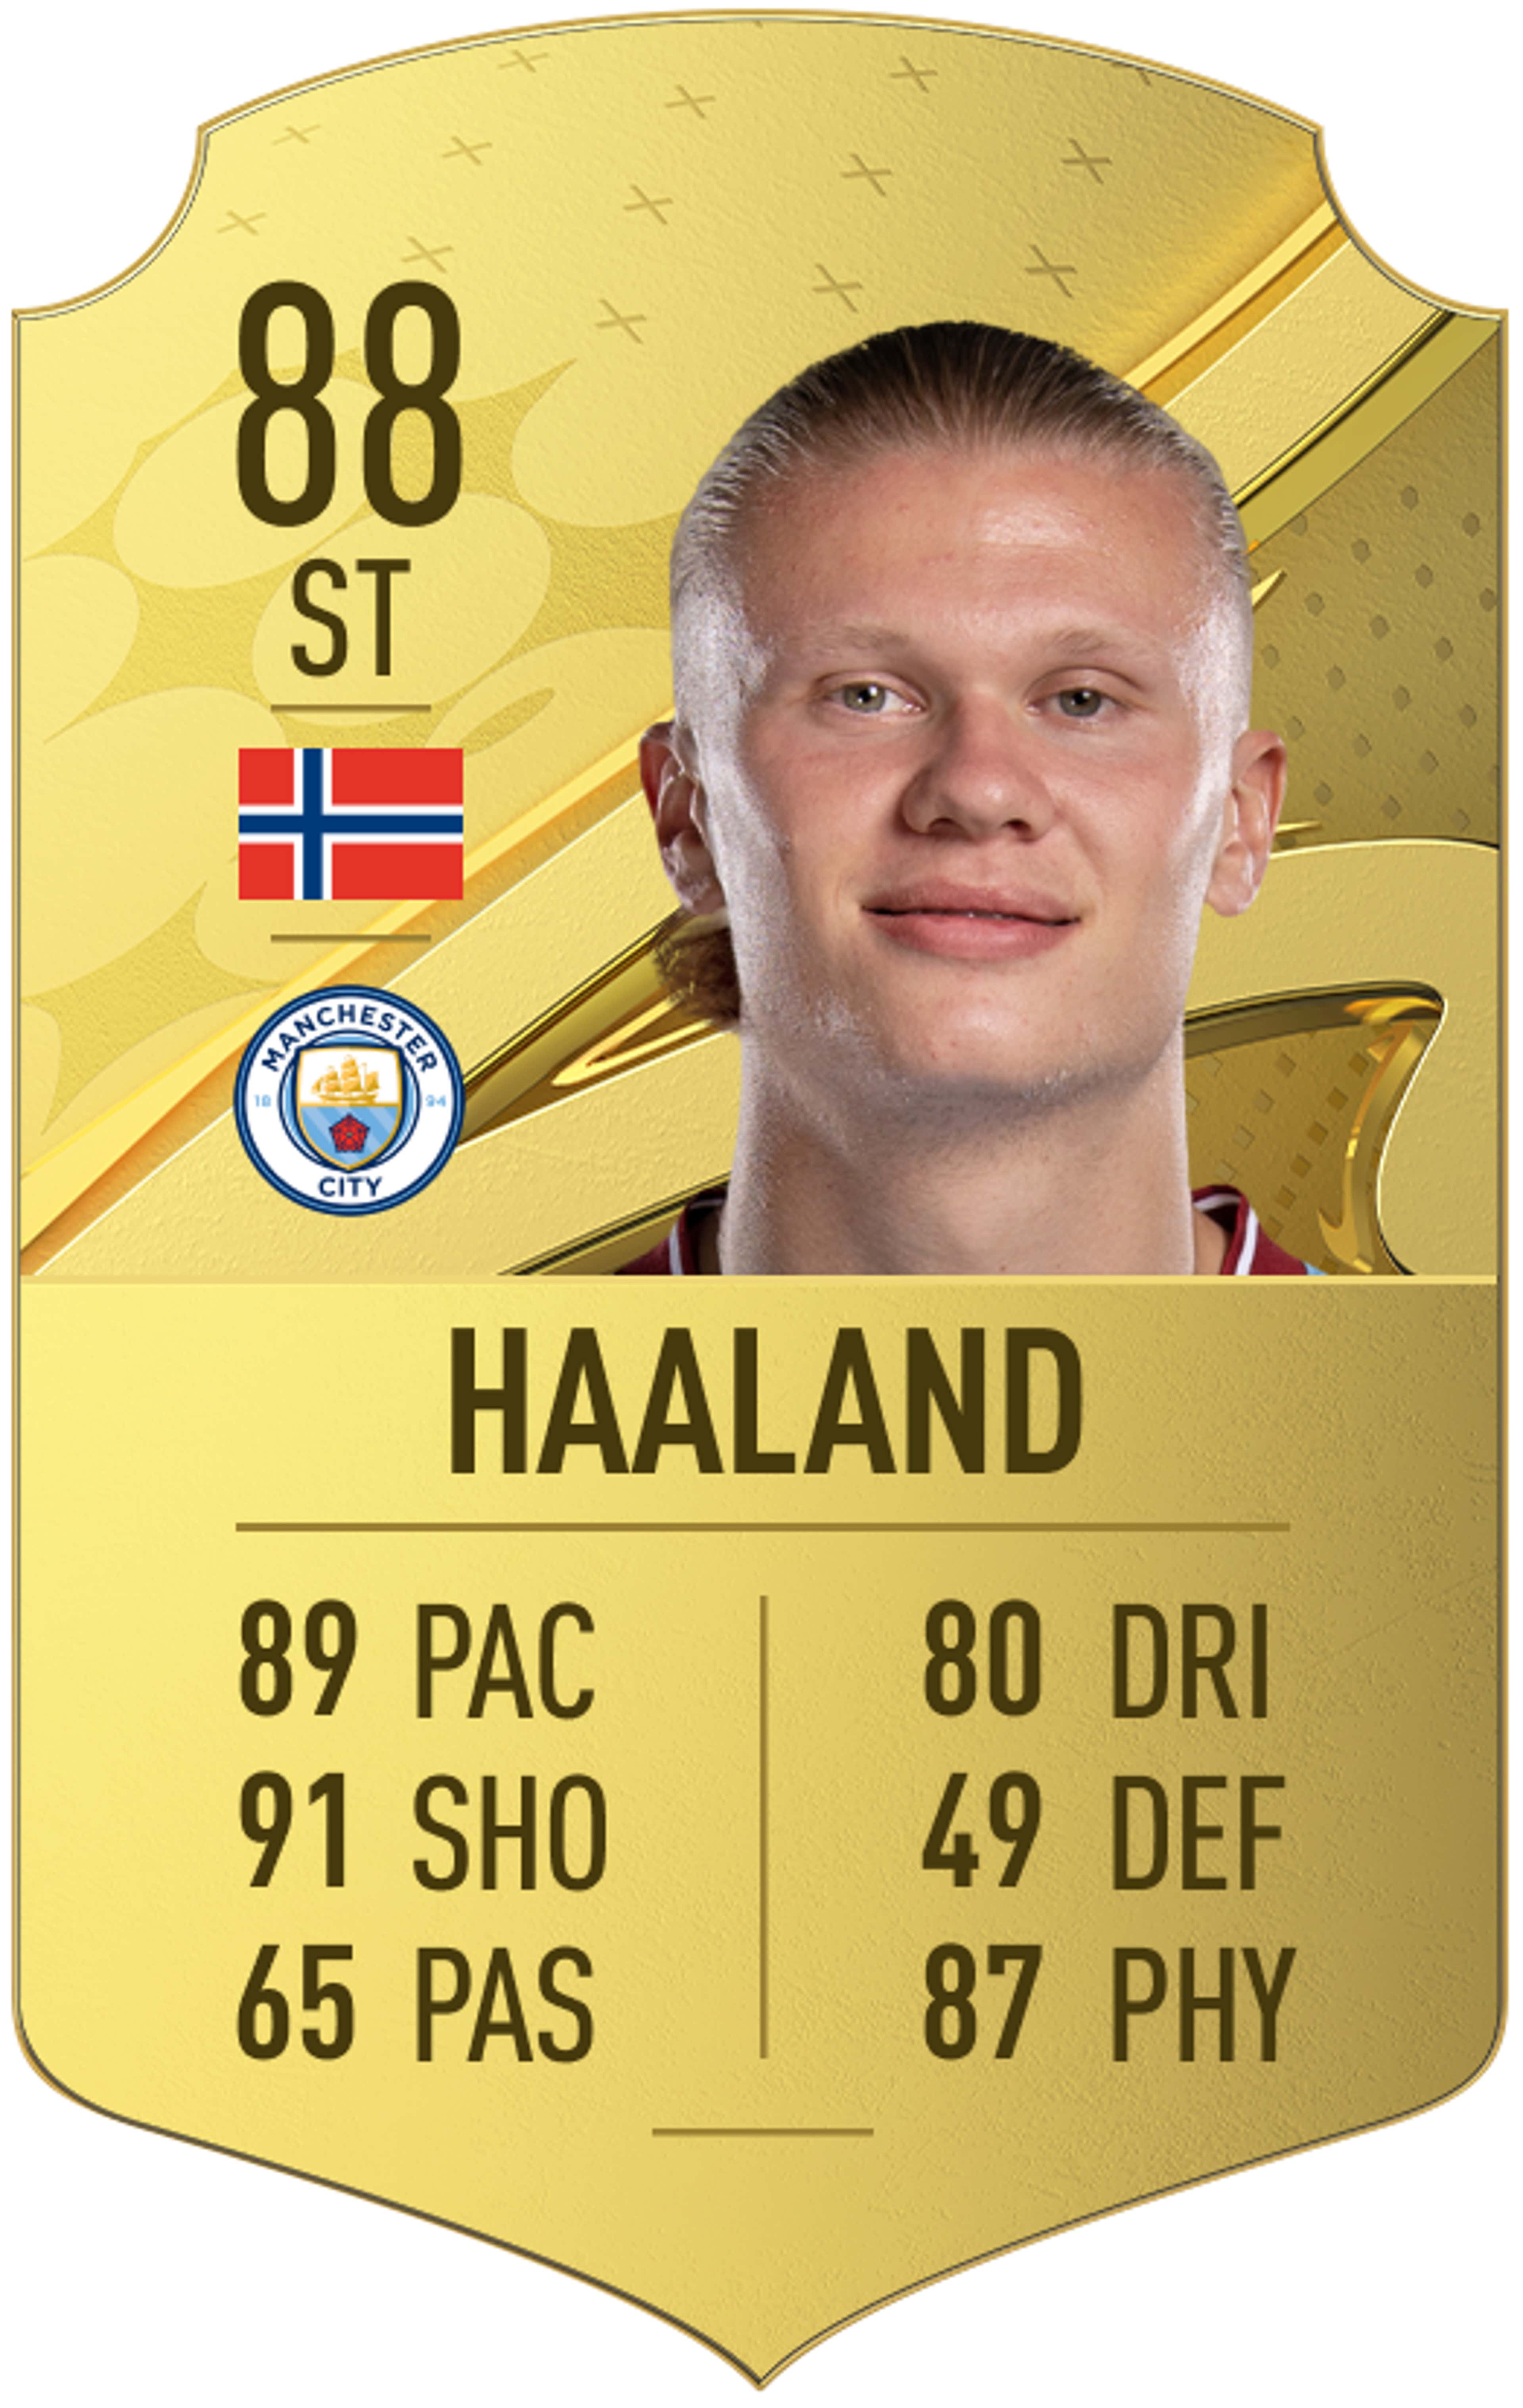 FIFA 23 Premier League ratings: Top 25 players revealed as Haaland